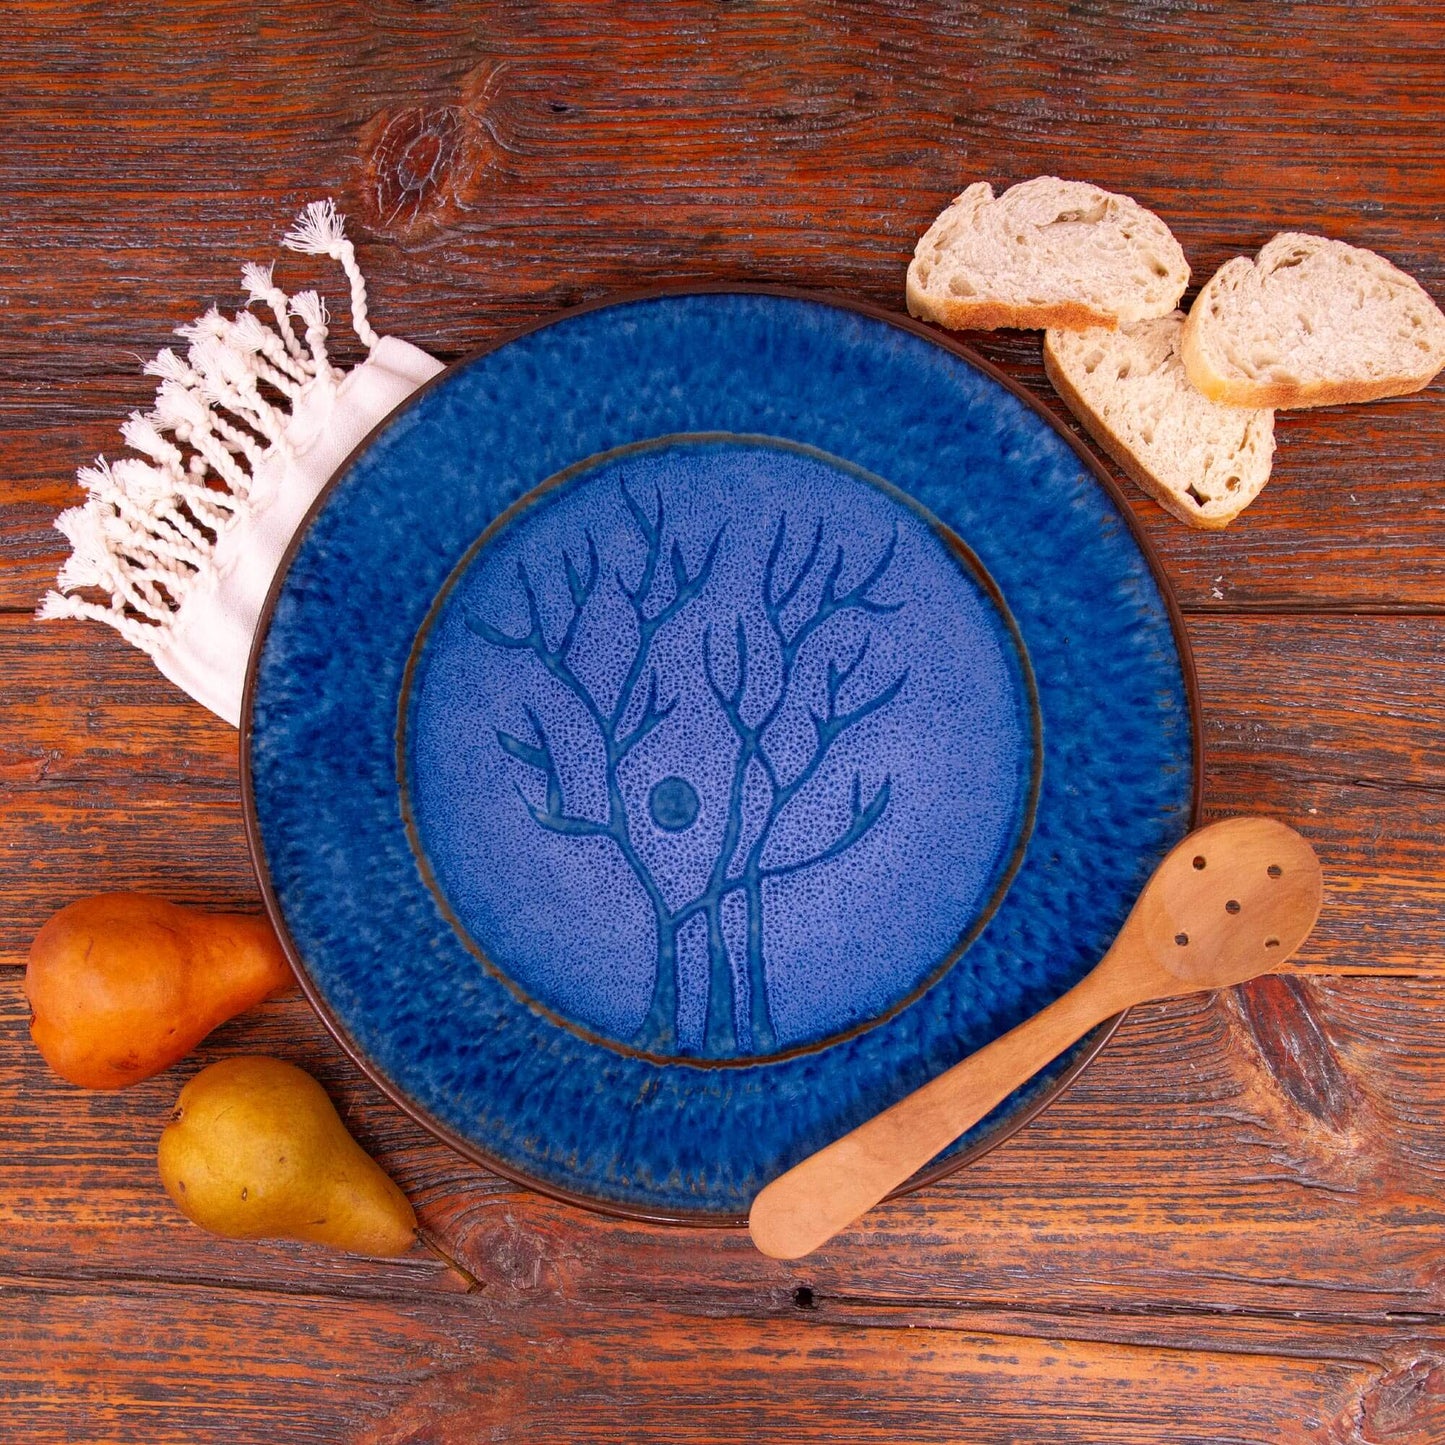  Handmade Pottery 15" Rimless Platter in Blue Tree pattern made by Georgetown Pottery in Maine